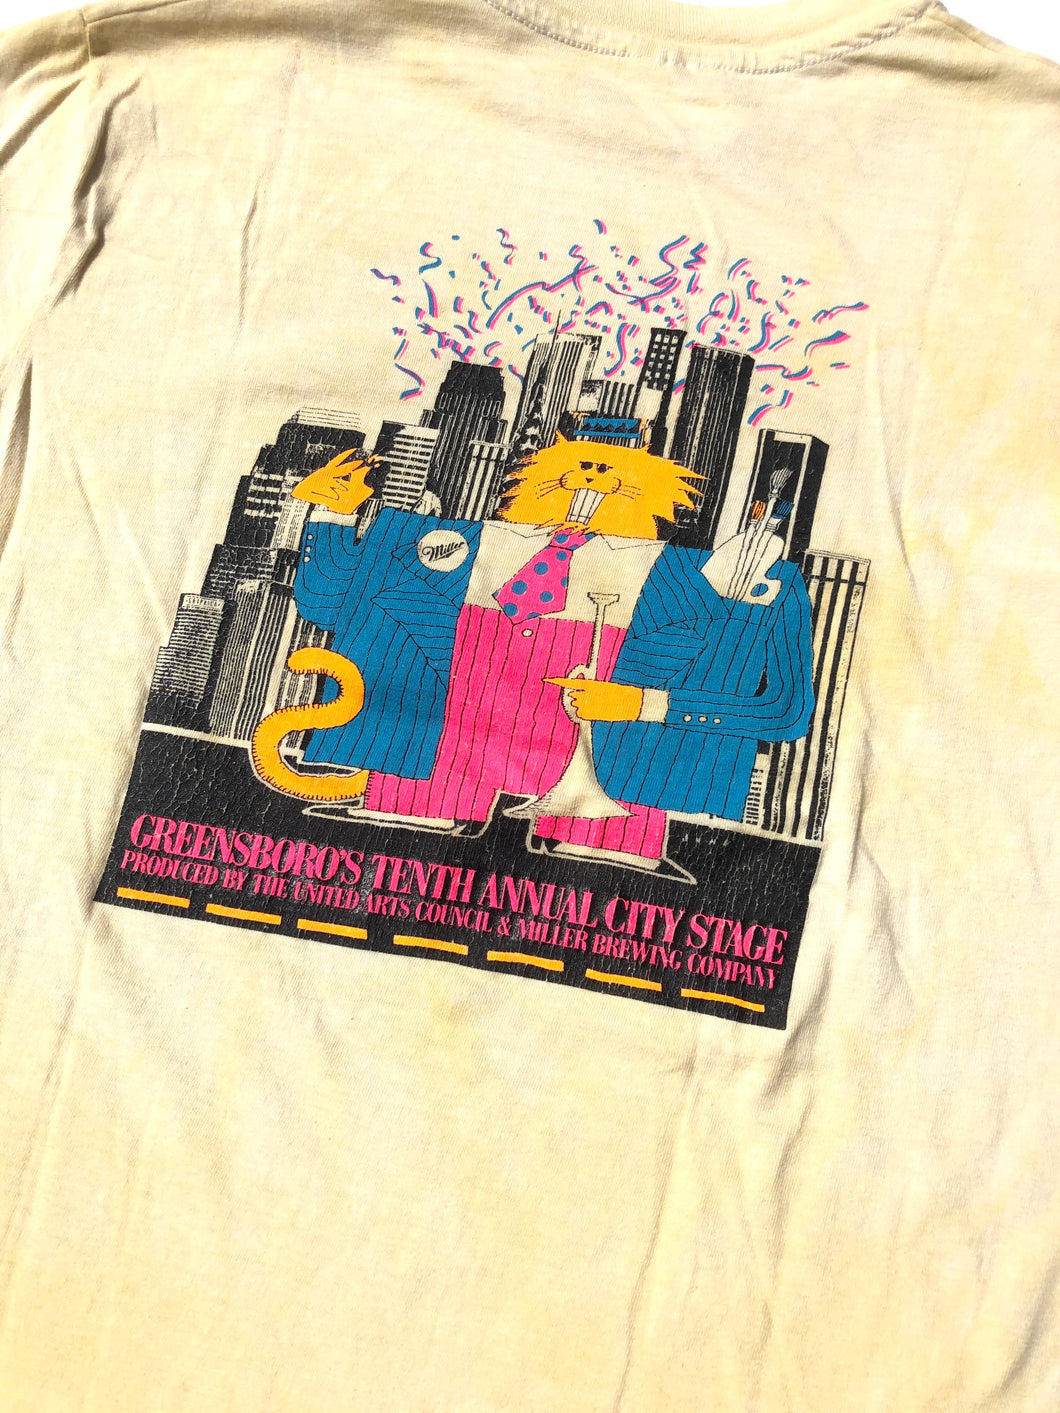 1989 miller city stage dyed shirt